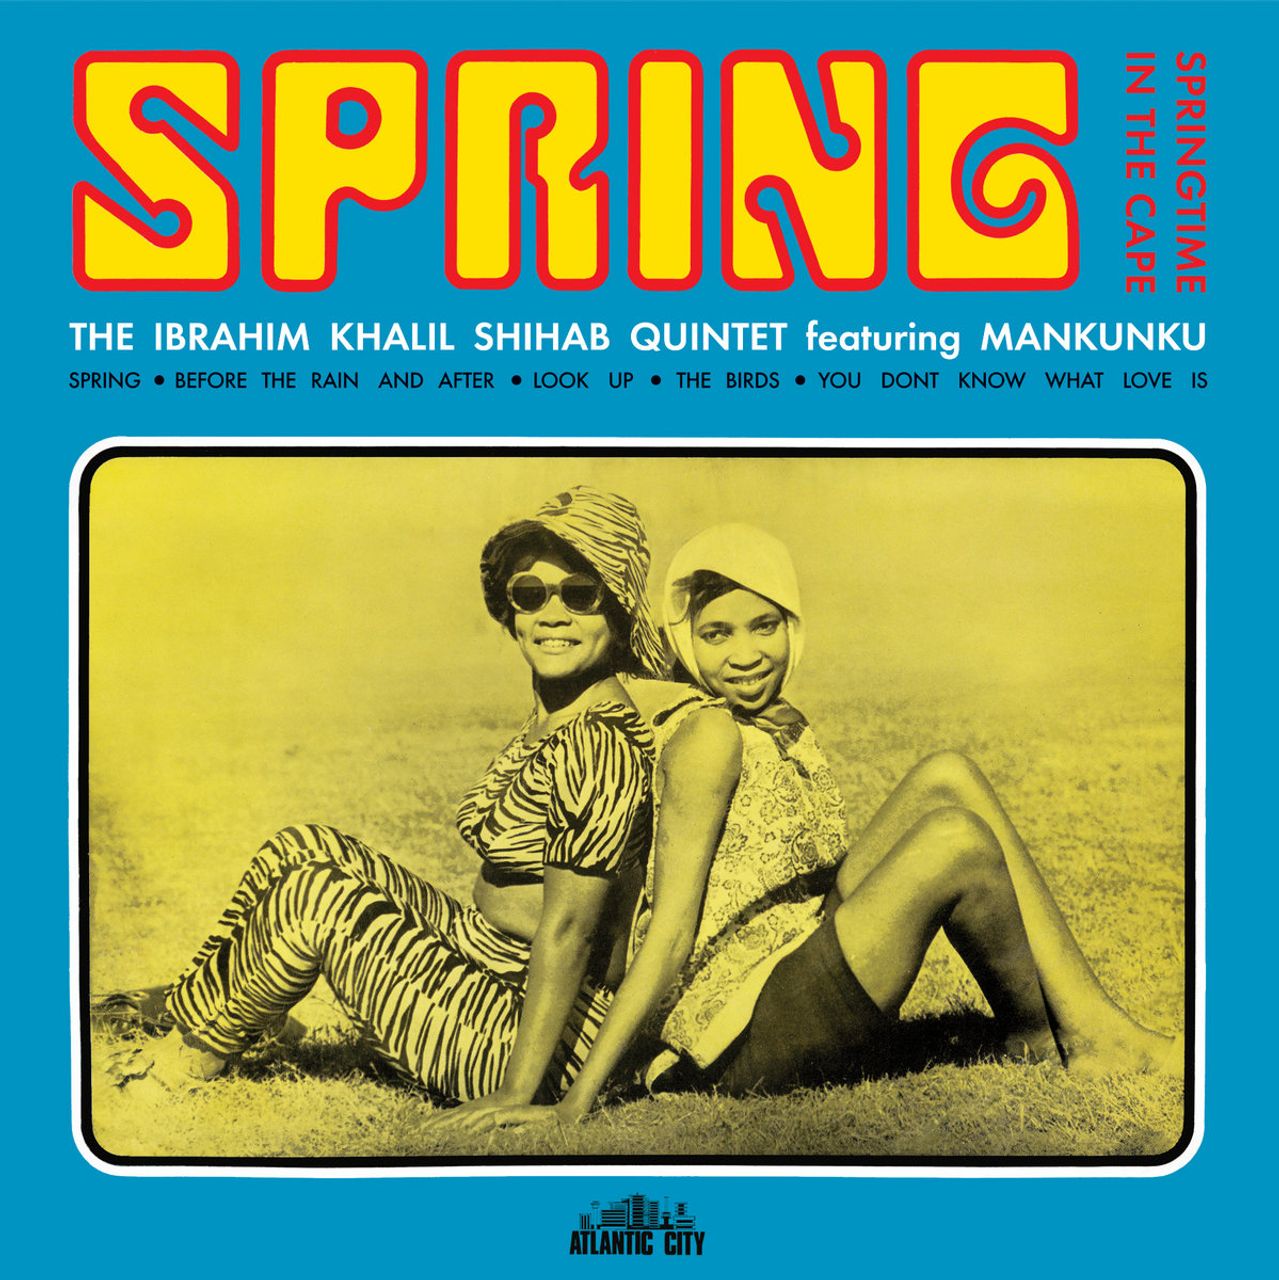 South Africa: Lost jazz classic ‘Spring’ finds a new home